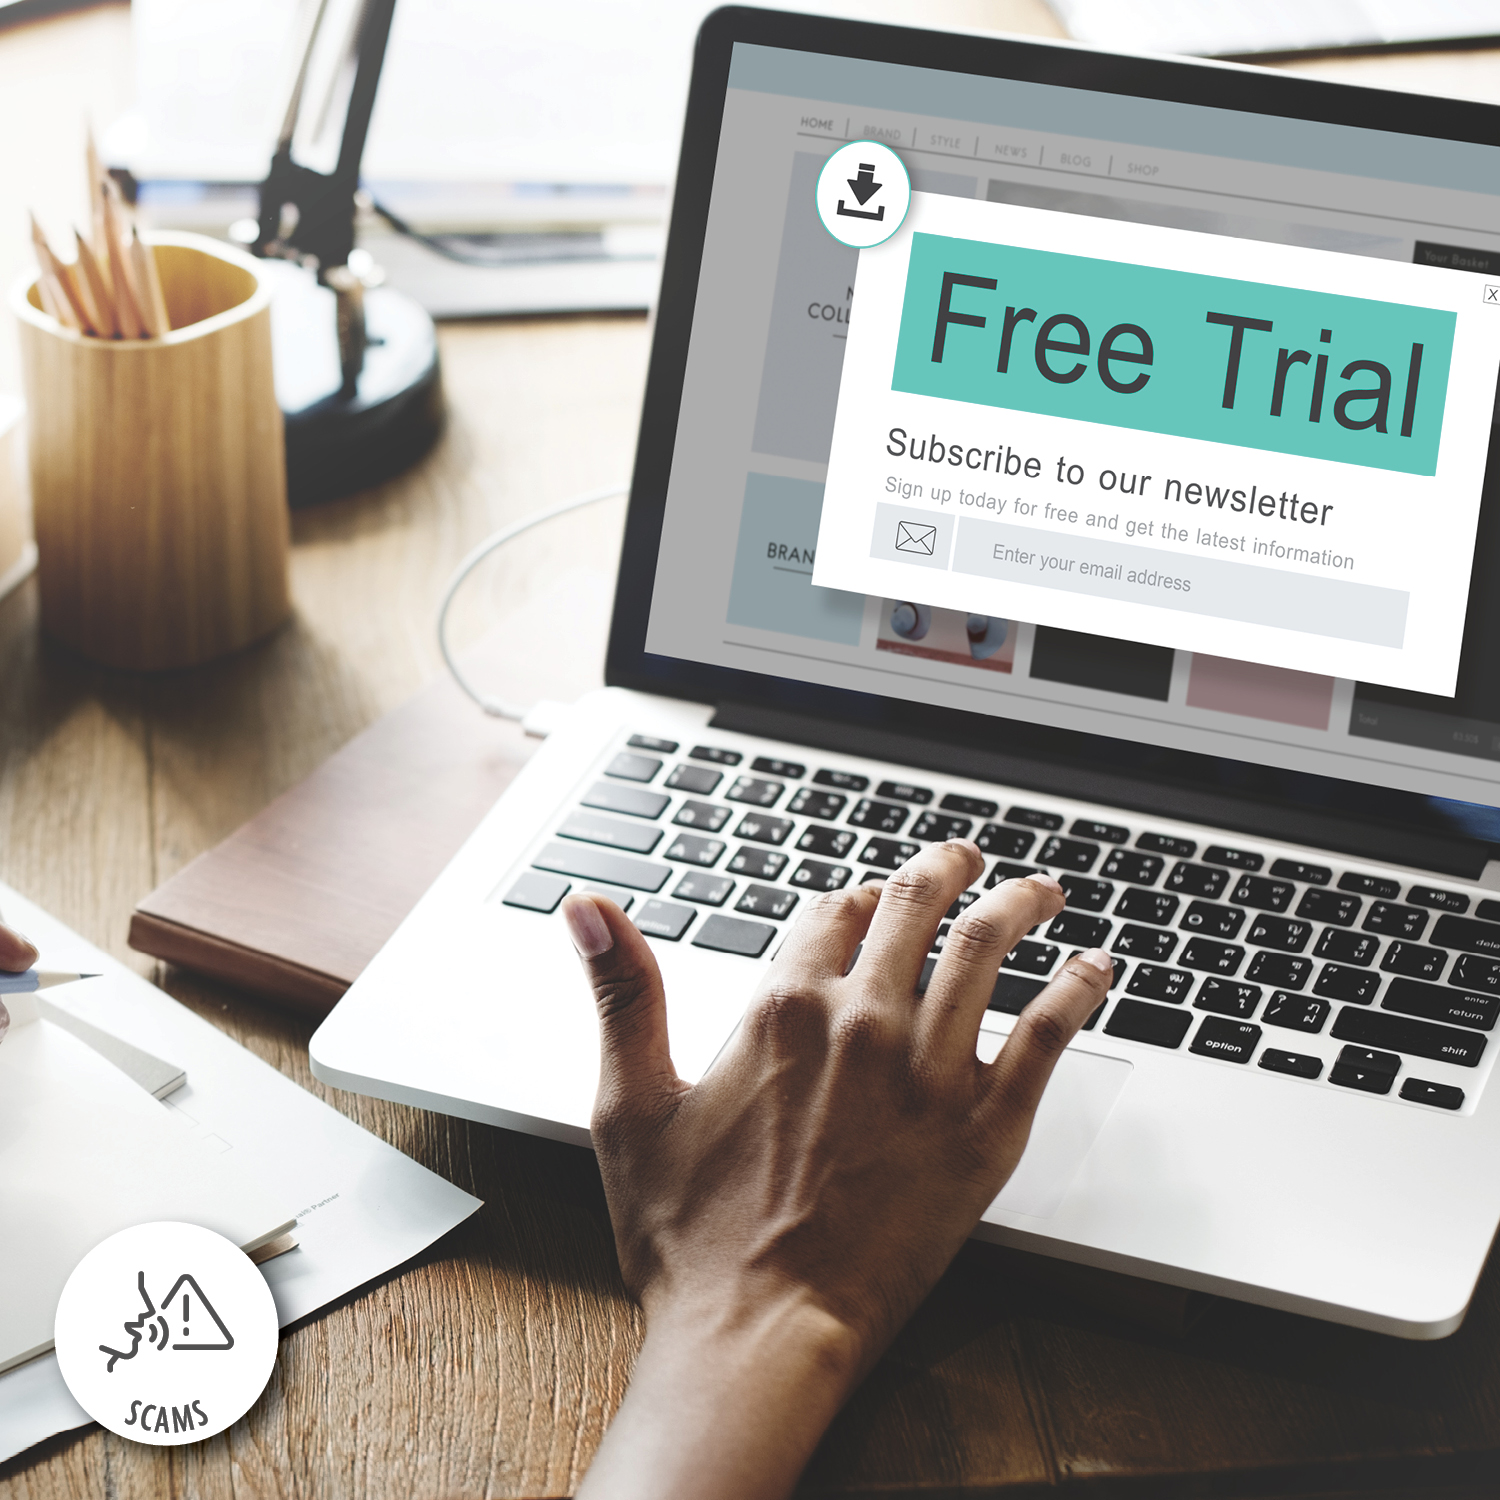 All You Need to Know About Free Trial Scams